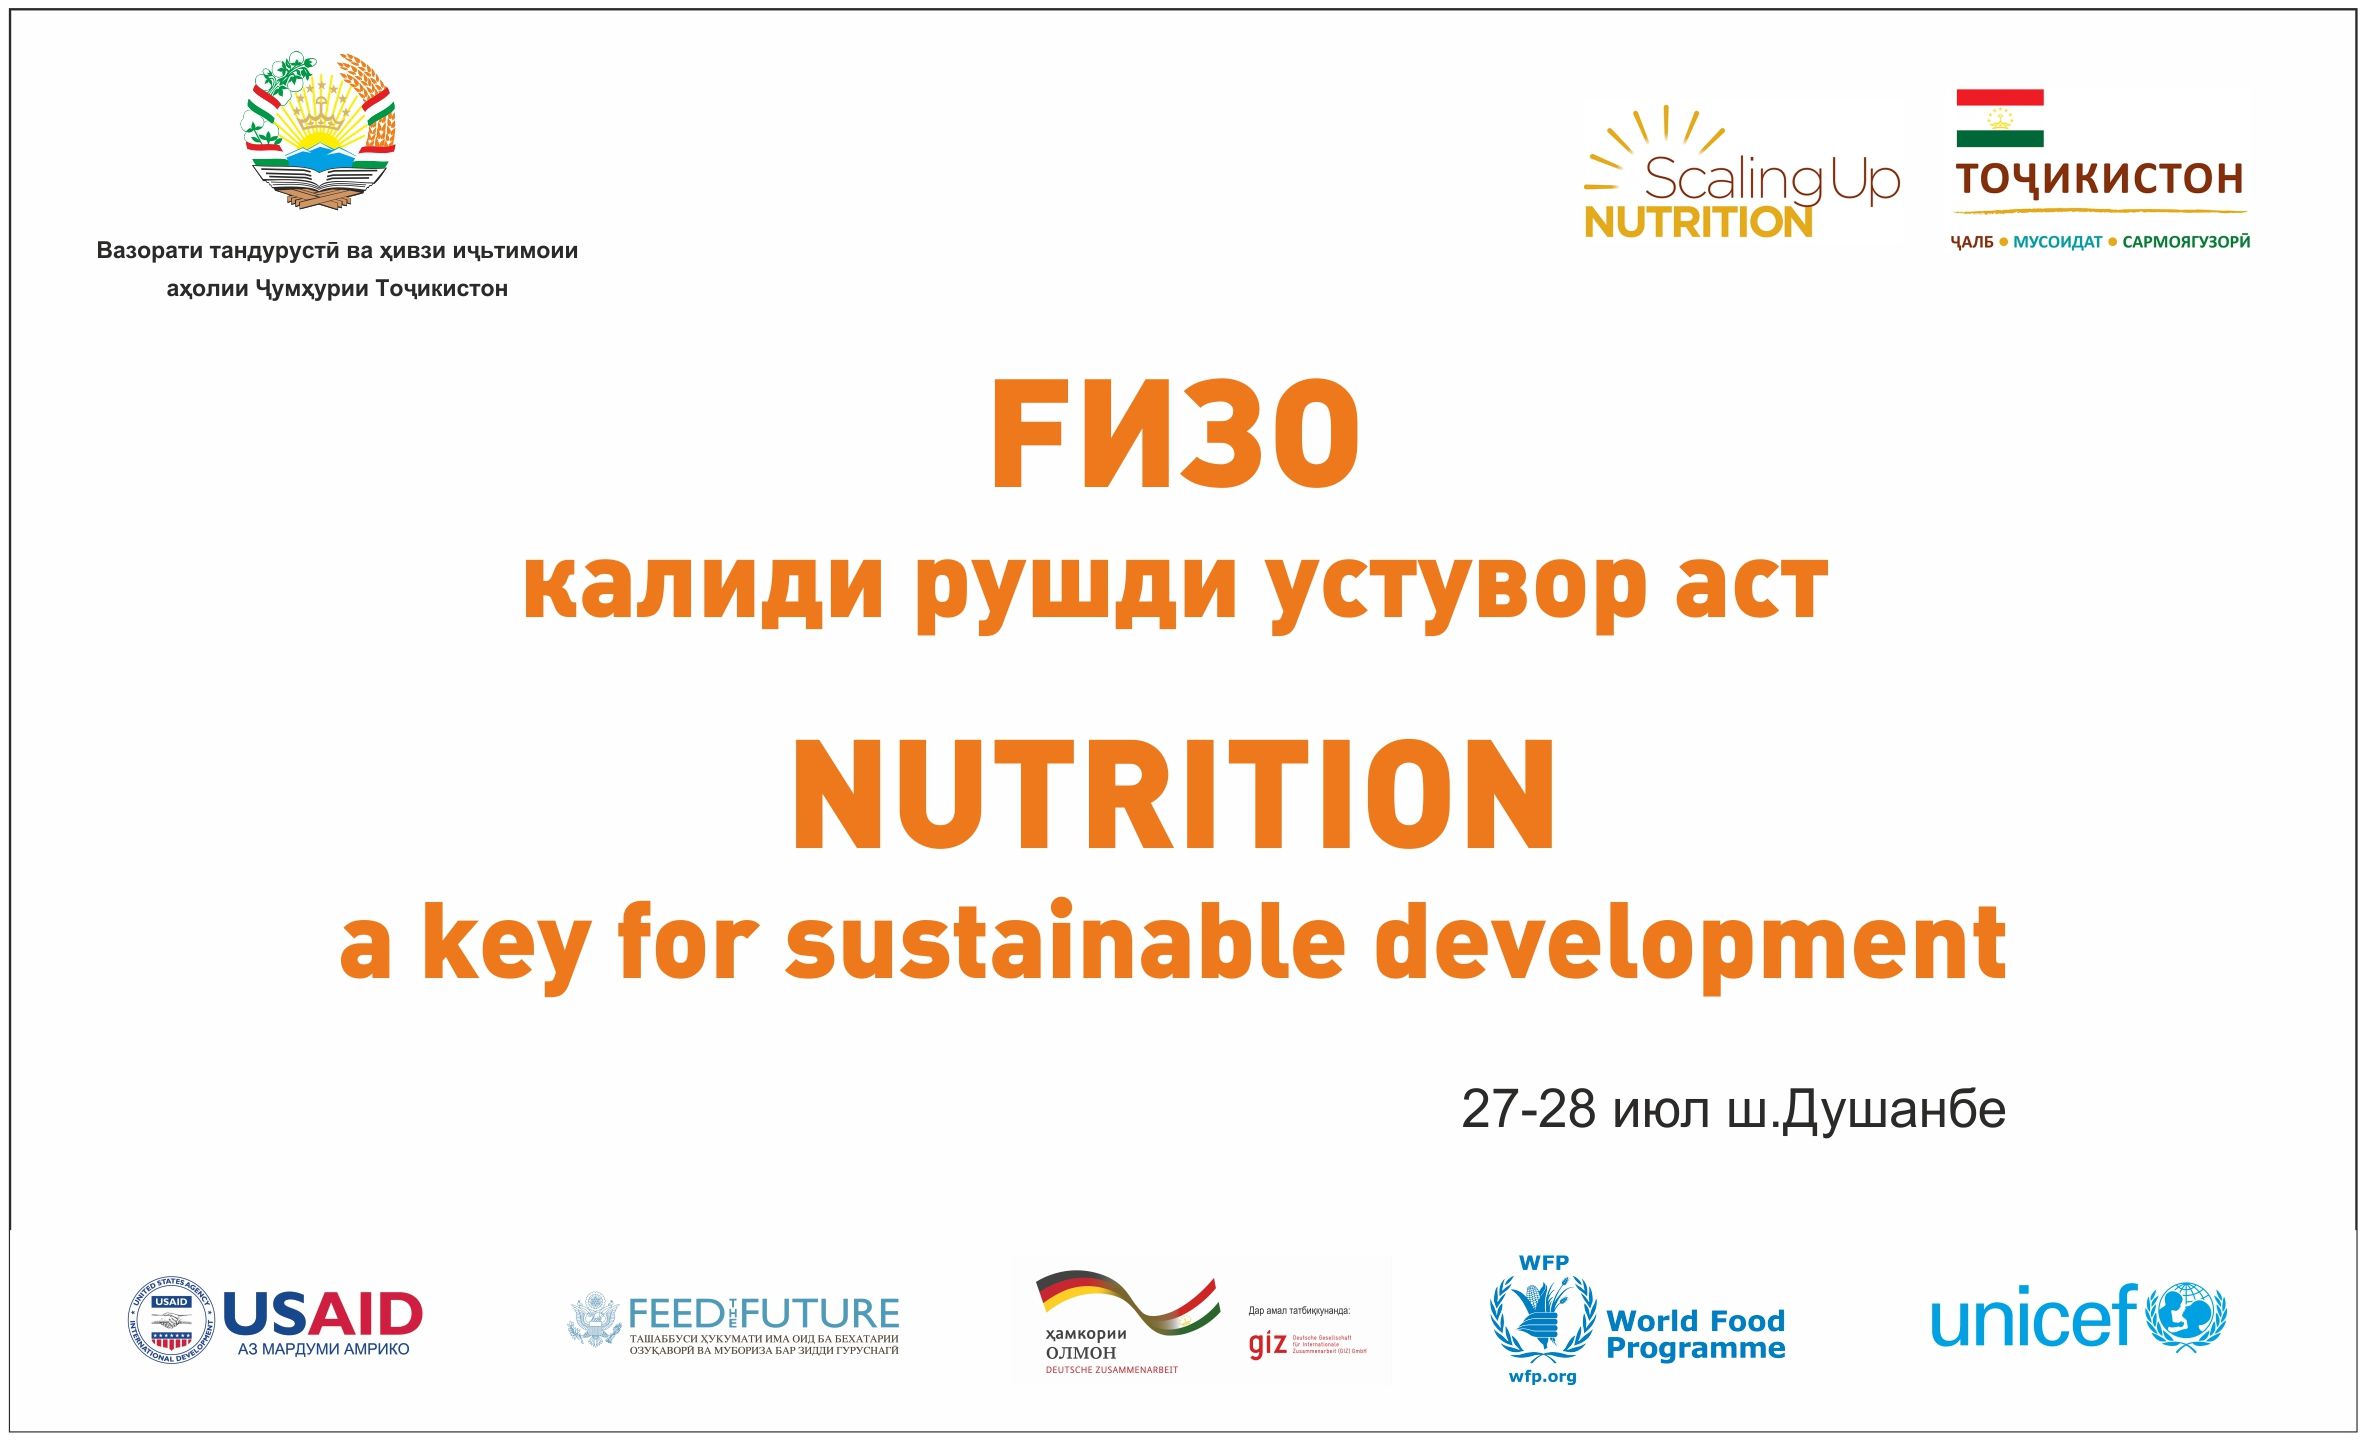 Working together for better nutrition for every child in Tajikistan